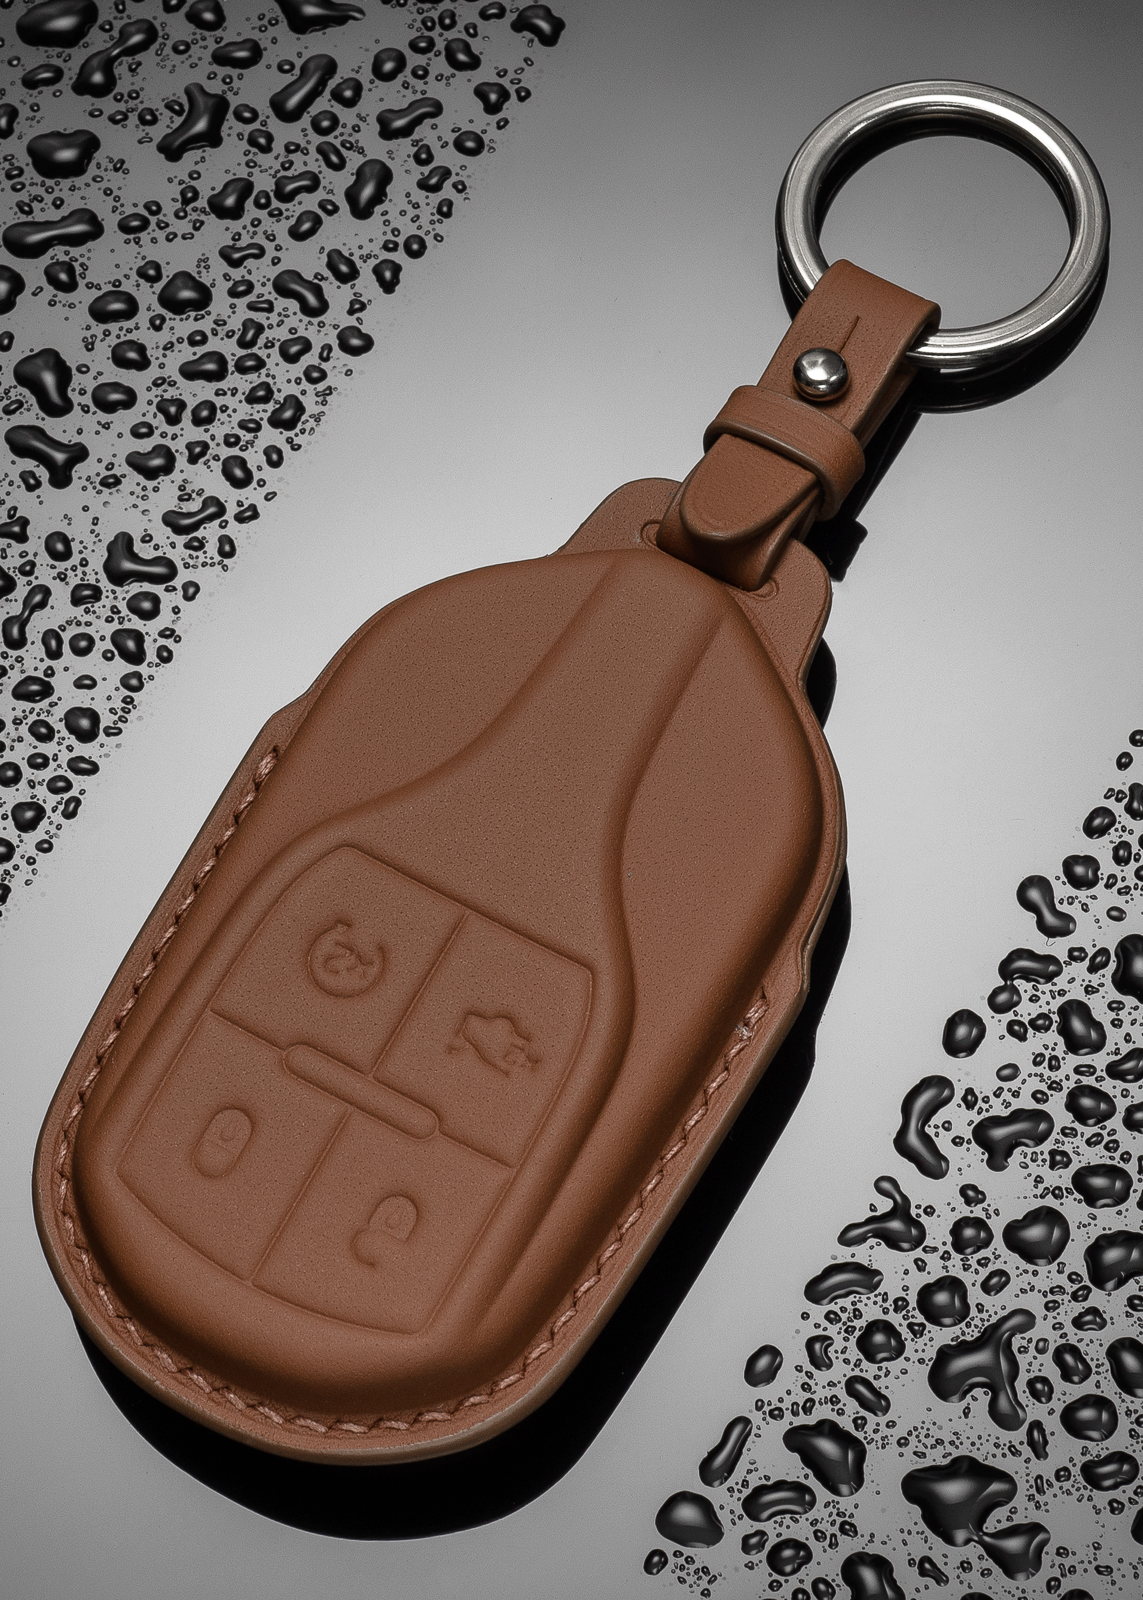 Does anyone know where I can get a key fob cover for our N? : r